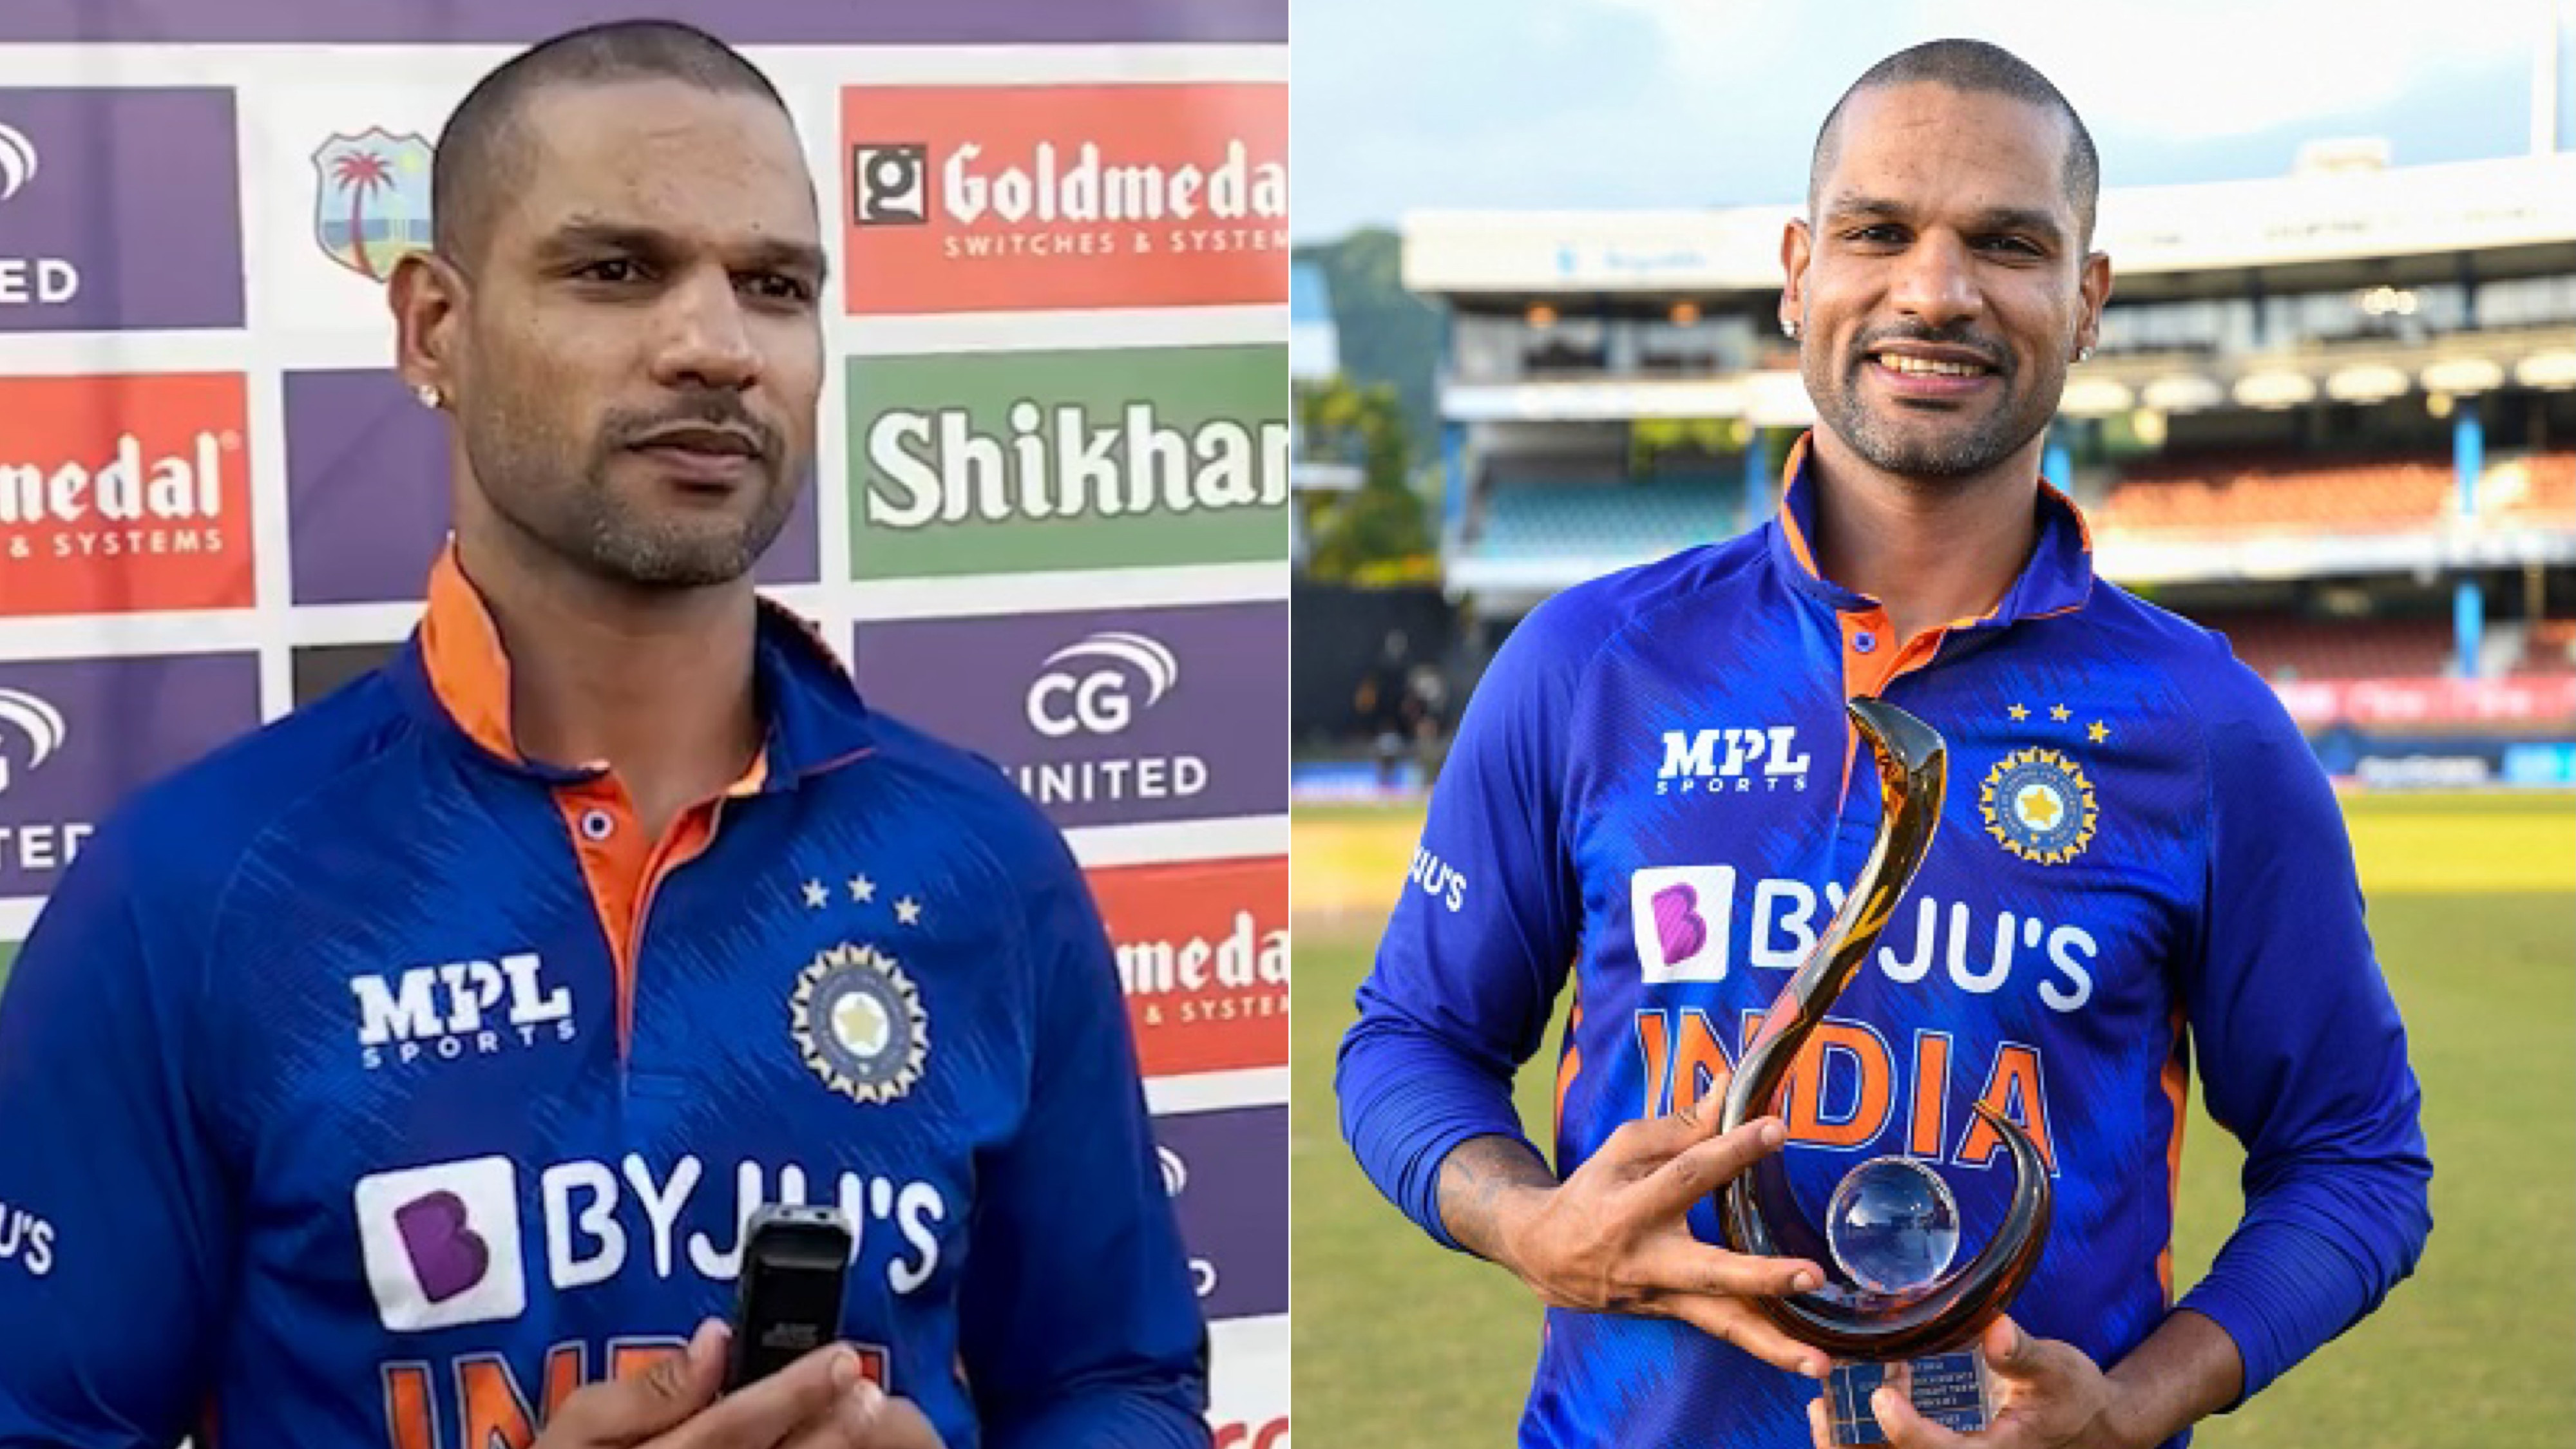 WI v IND 2022: “I am very proud of the team”, says Shikhar Dhawan after 3-0 ODI series sweep in West Indies